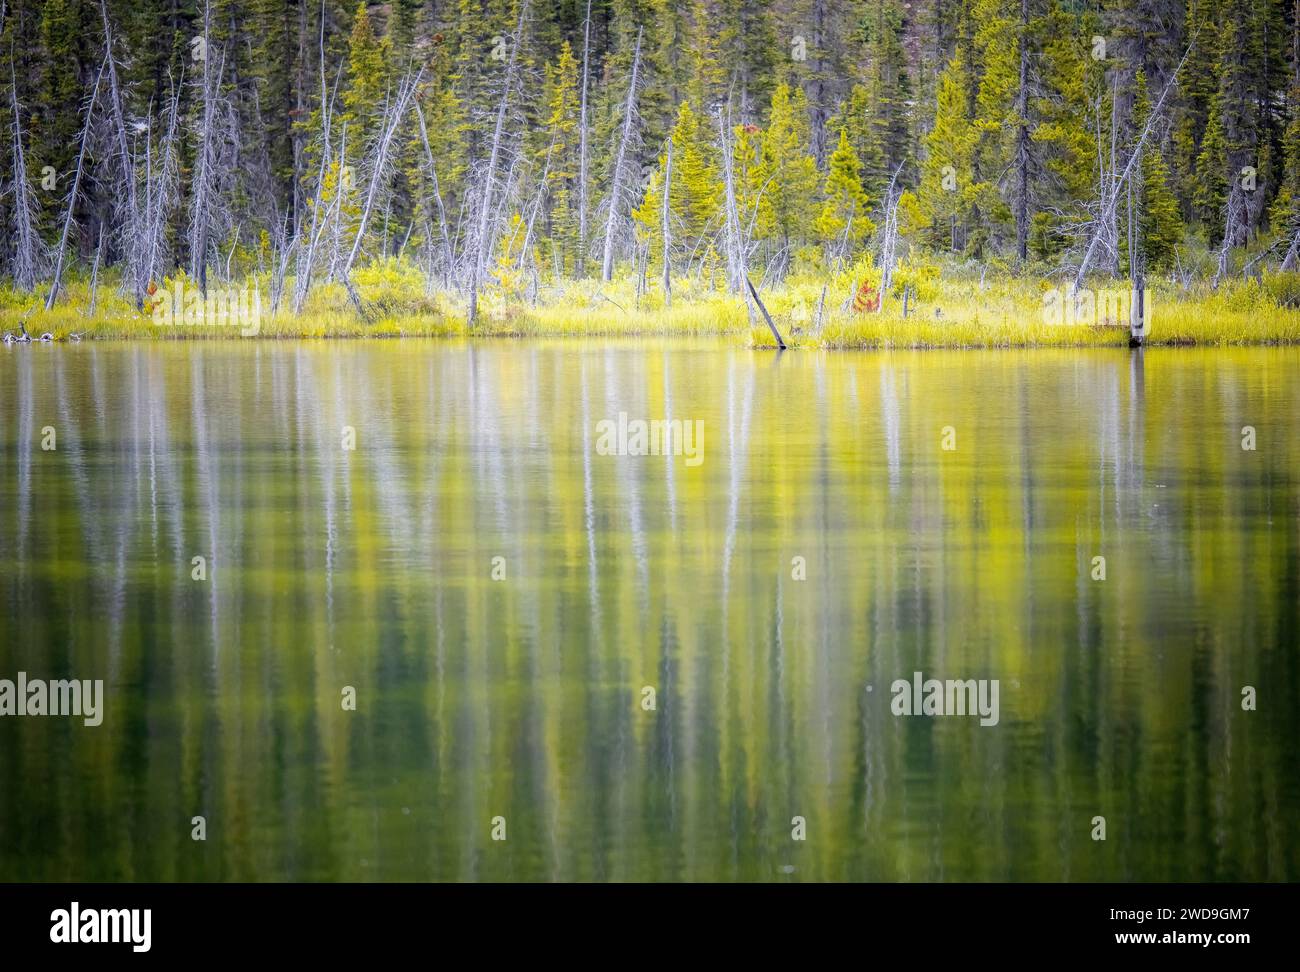 A small pond near Banff national park in Canada. Before afternoon storm, the water is so calm, reflects the colorful forest on the bank. Stock Photo